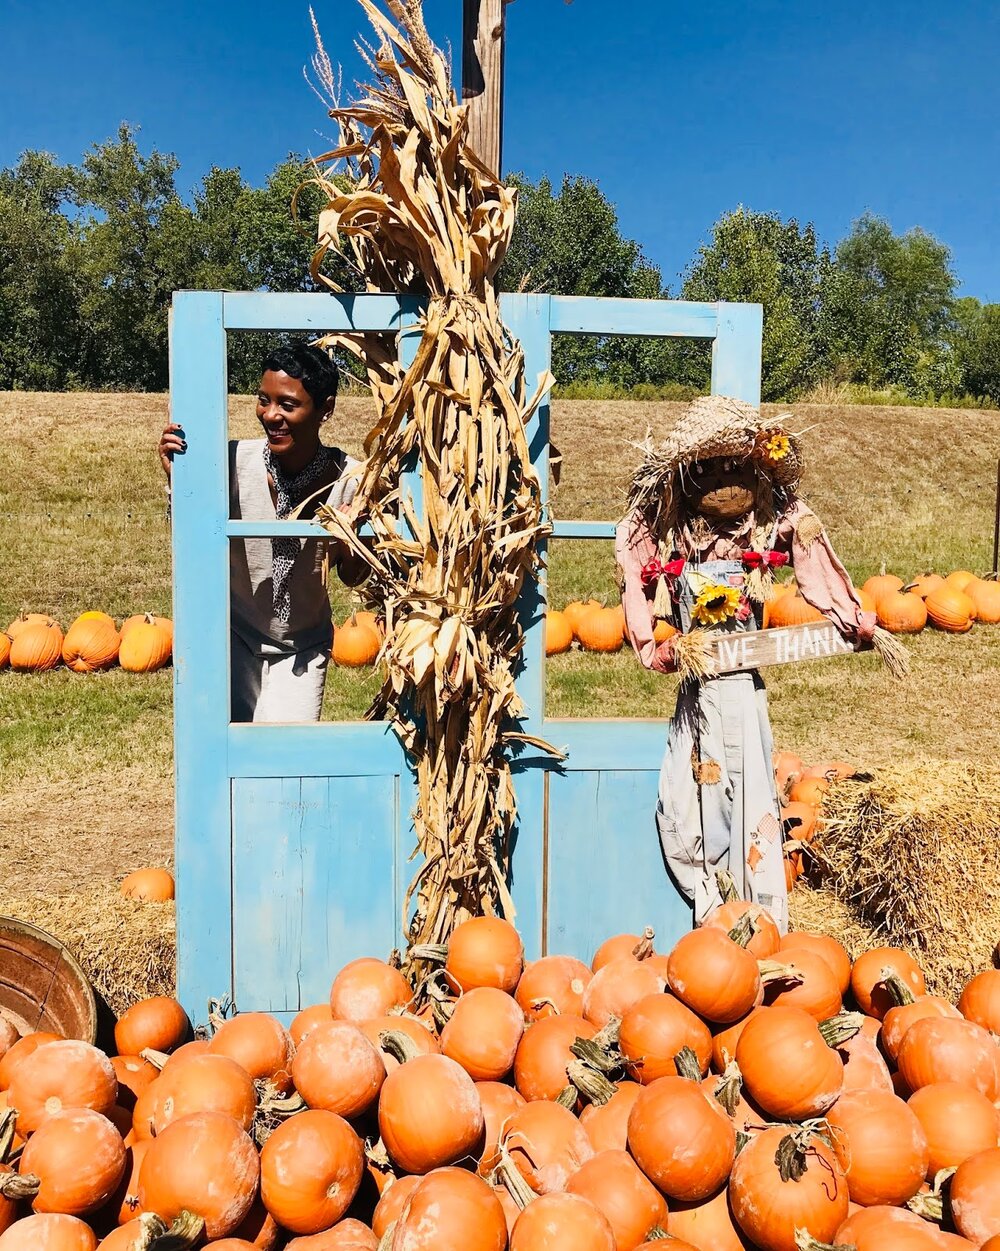 The Cutest Pumpkin Baskets, Posing With The Scare Crows And Getting Lost In The CRAZIEST Maze!